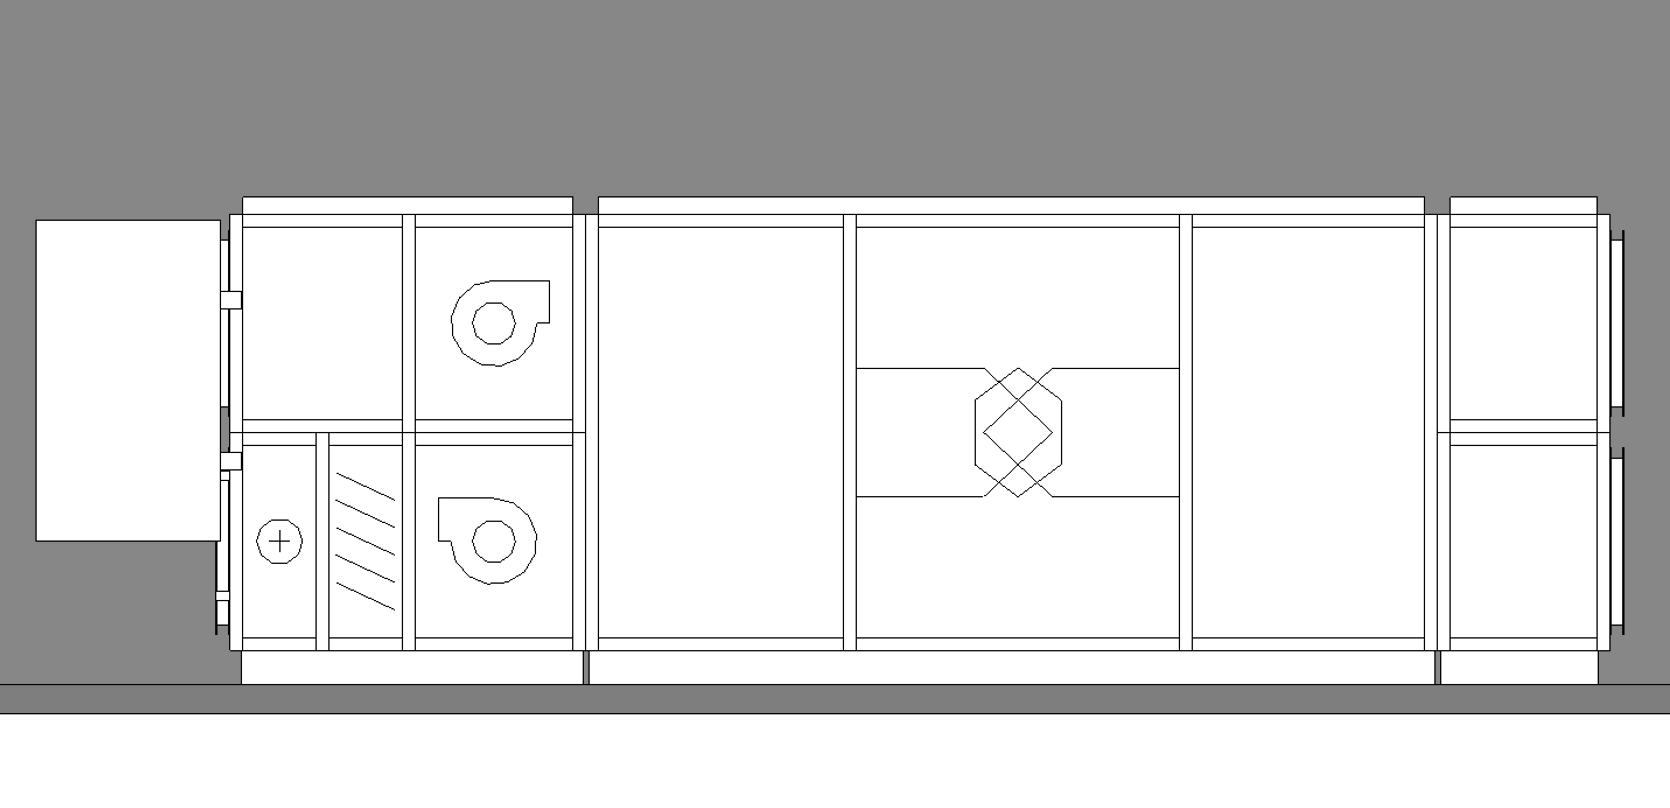 Complete modular AHU Revit family in plan view.